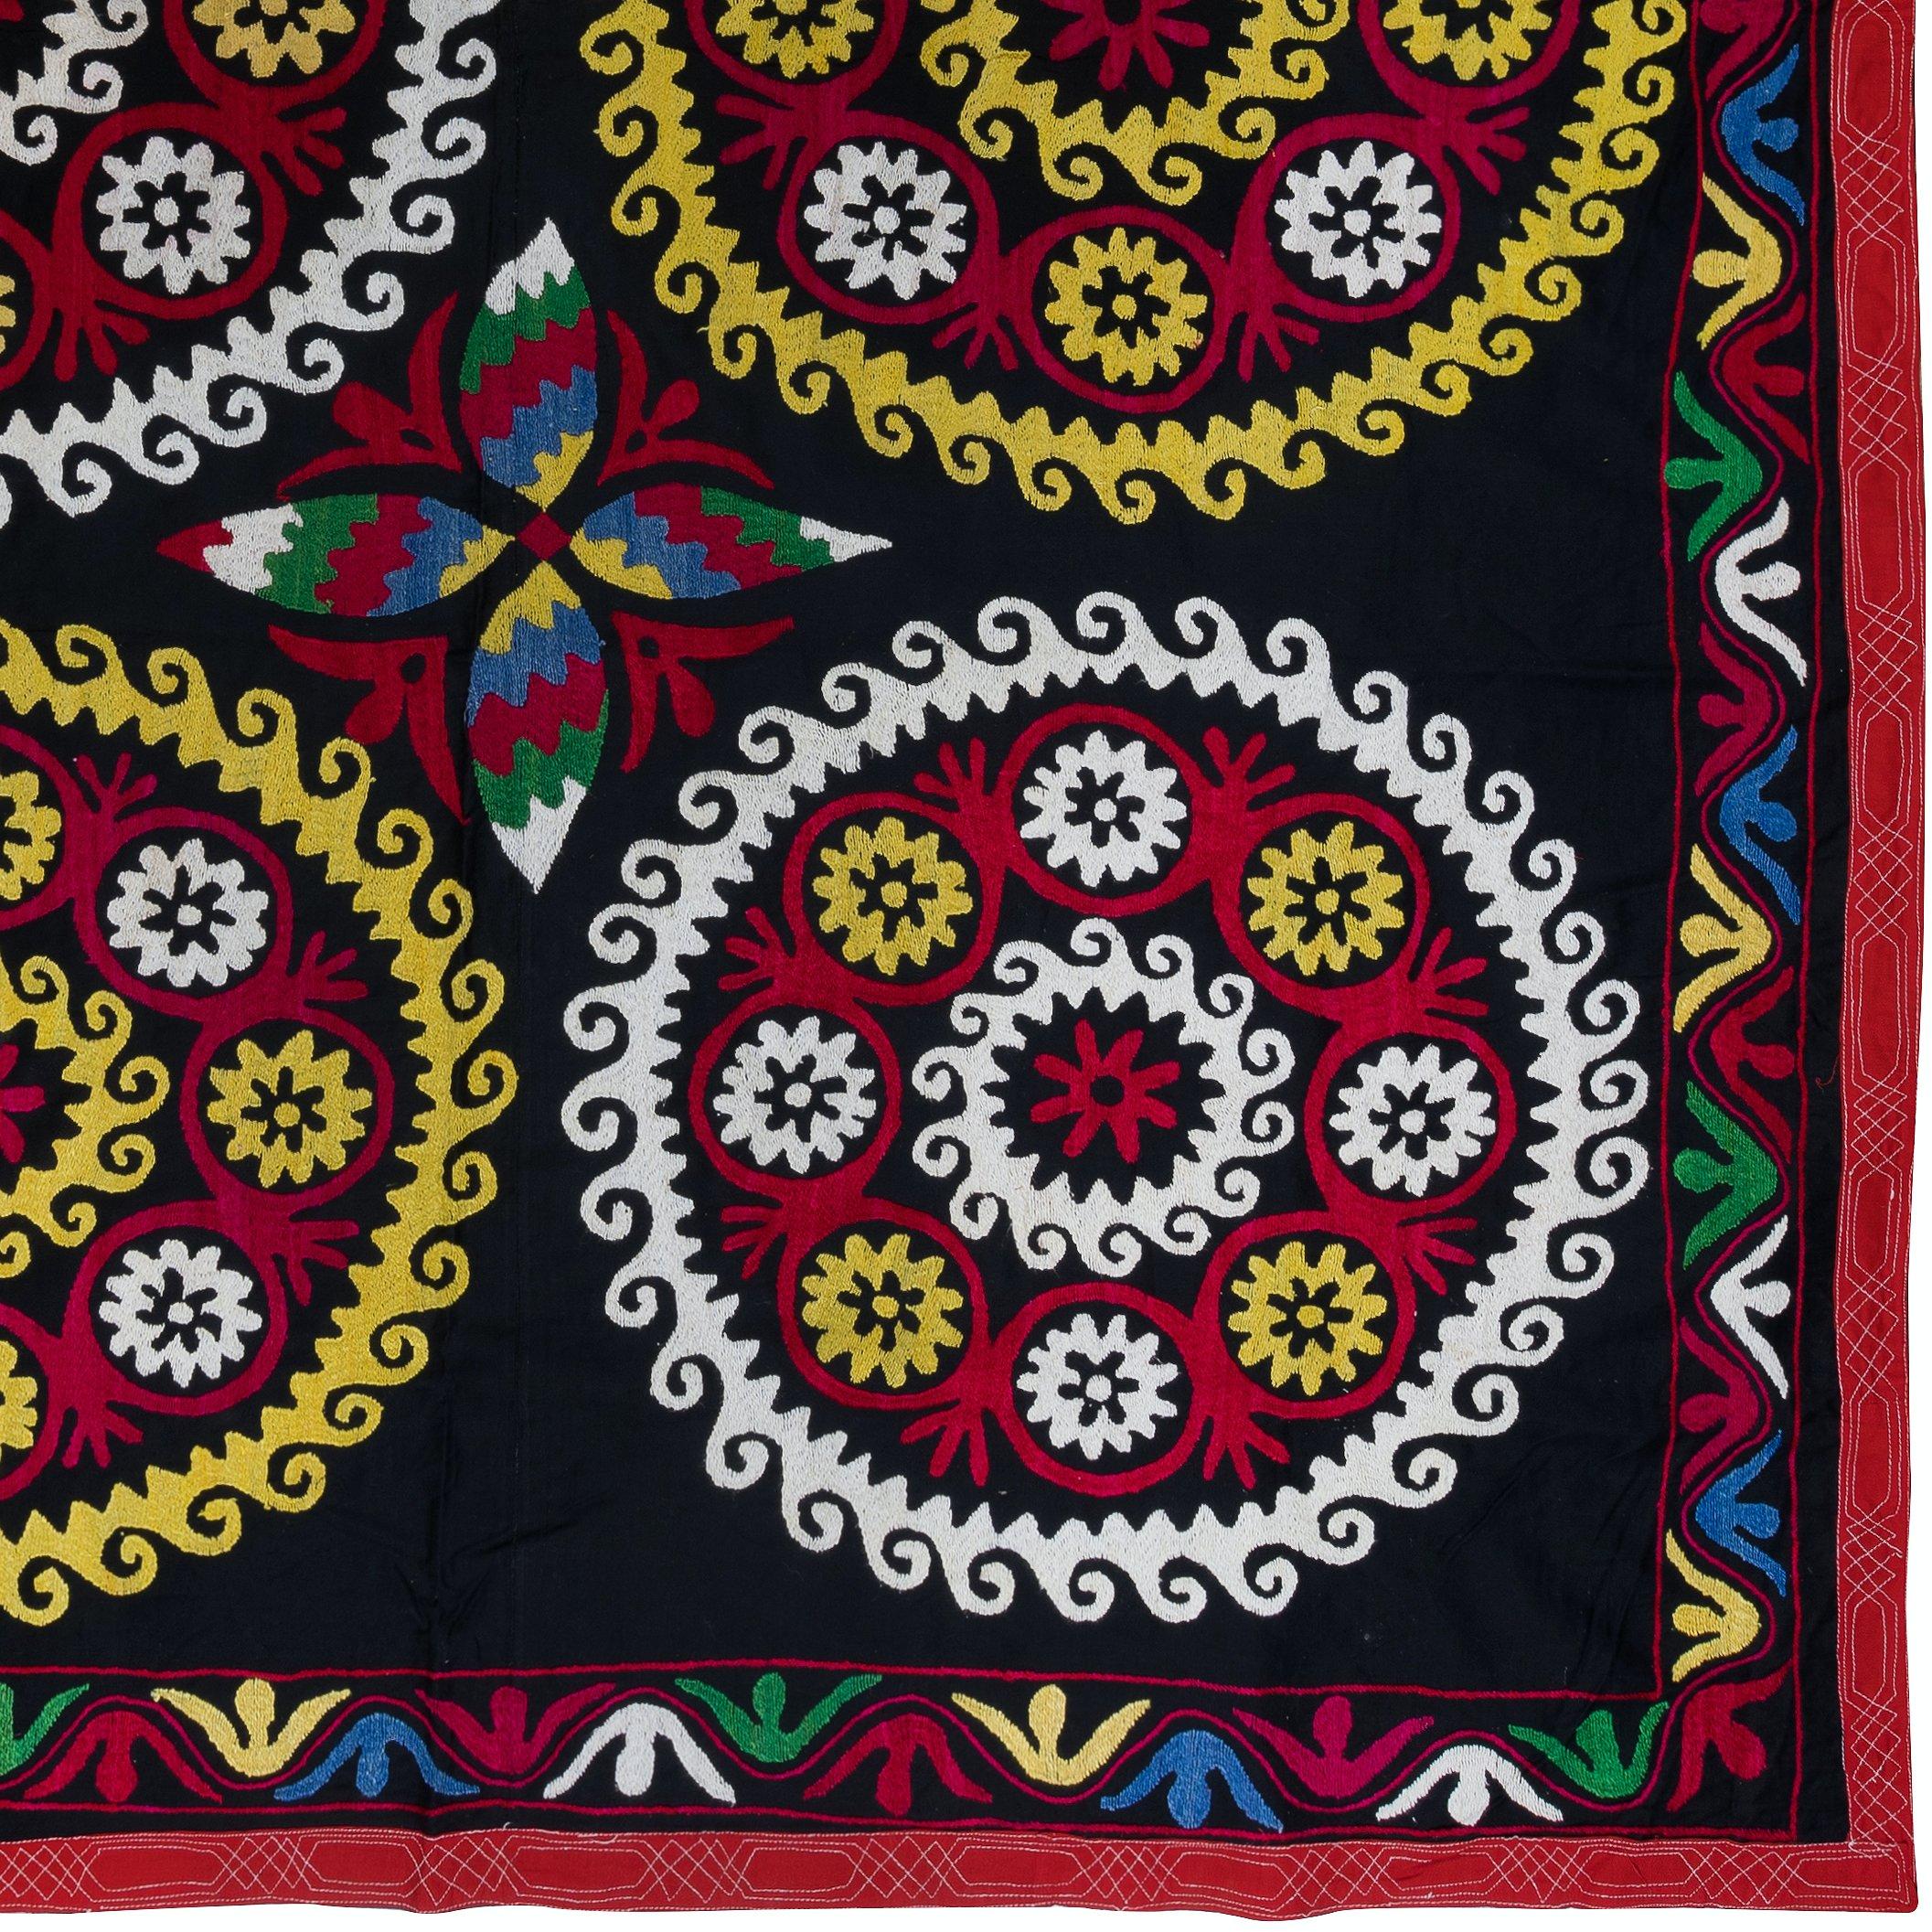 Uzbek 5x6.6 ft Colorful Silk Hand Embroidery Wall Hanging, Old Suzani Fabric Bedspread For Sale